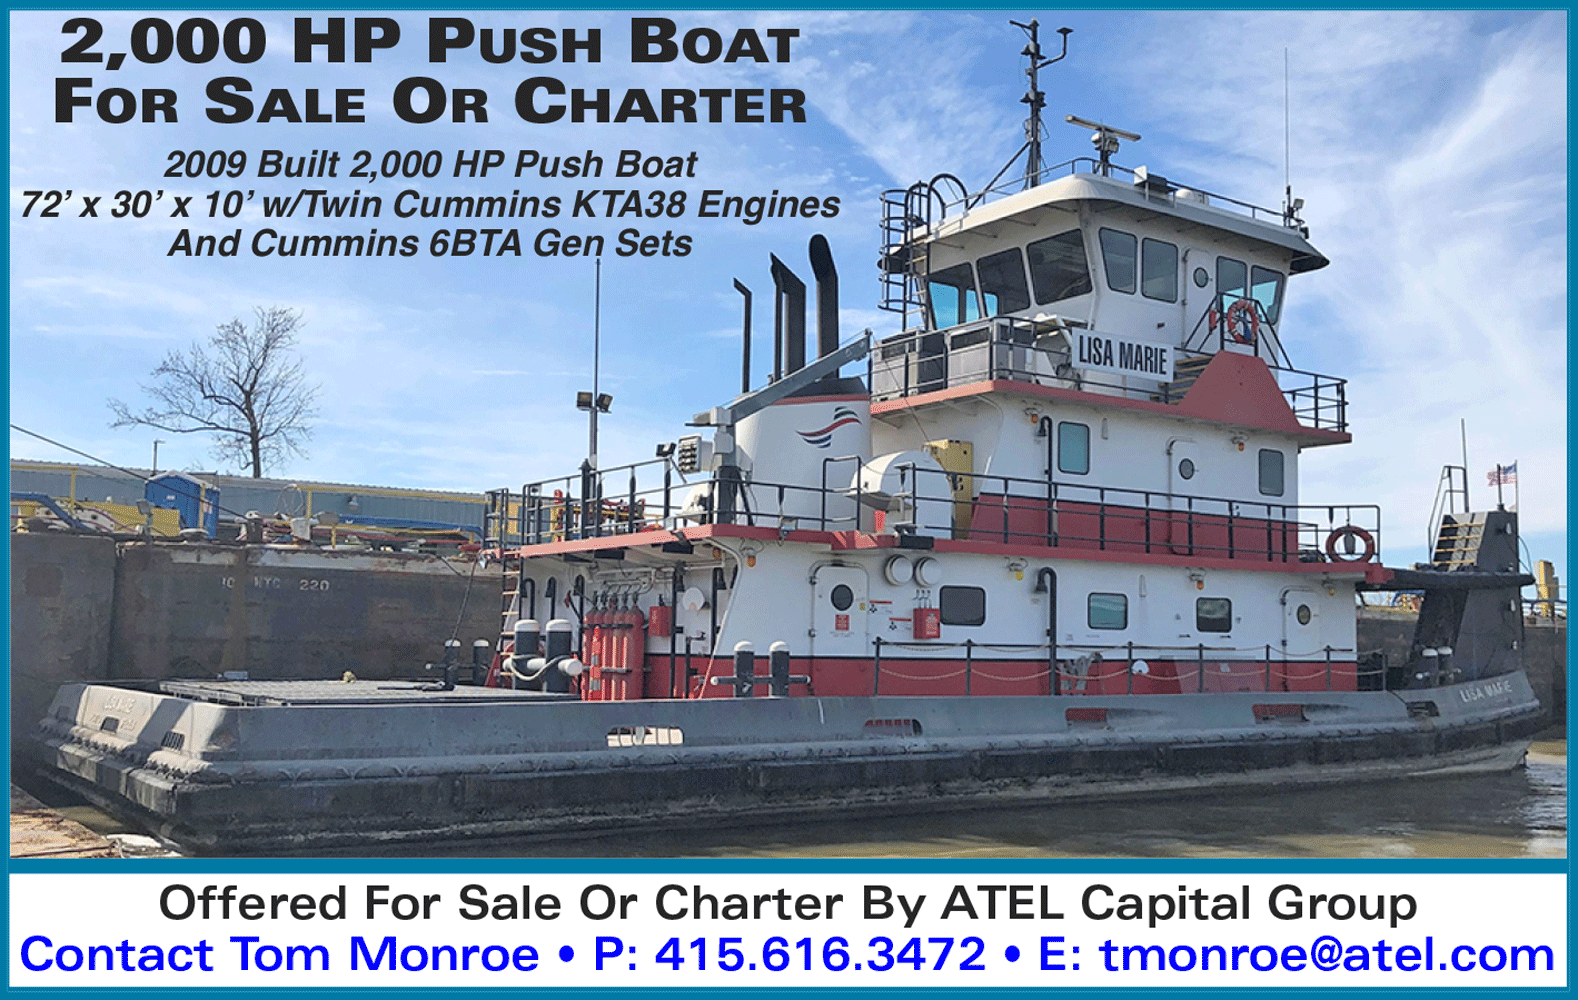 ATEL-EQUIPMENT-SERVICES-PUSHBOAT-WEB-8221.gif